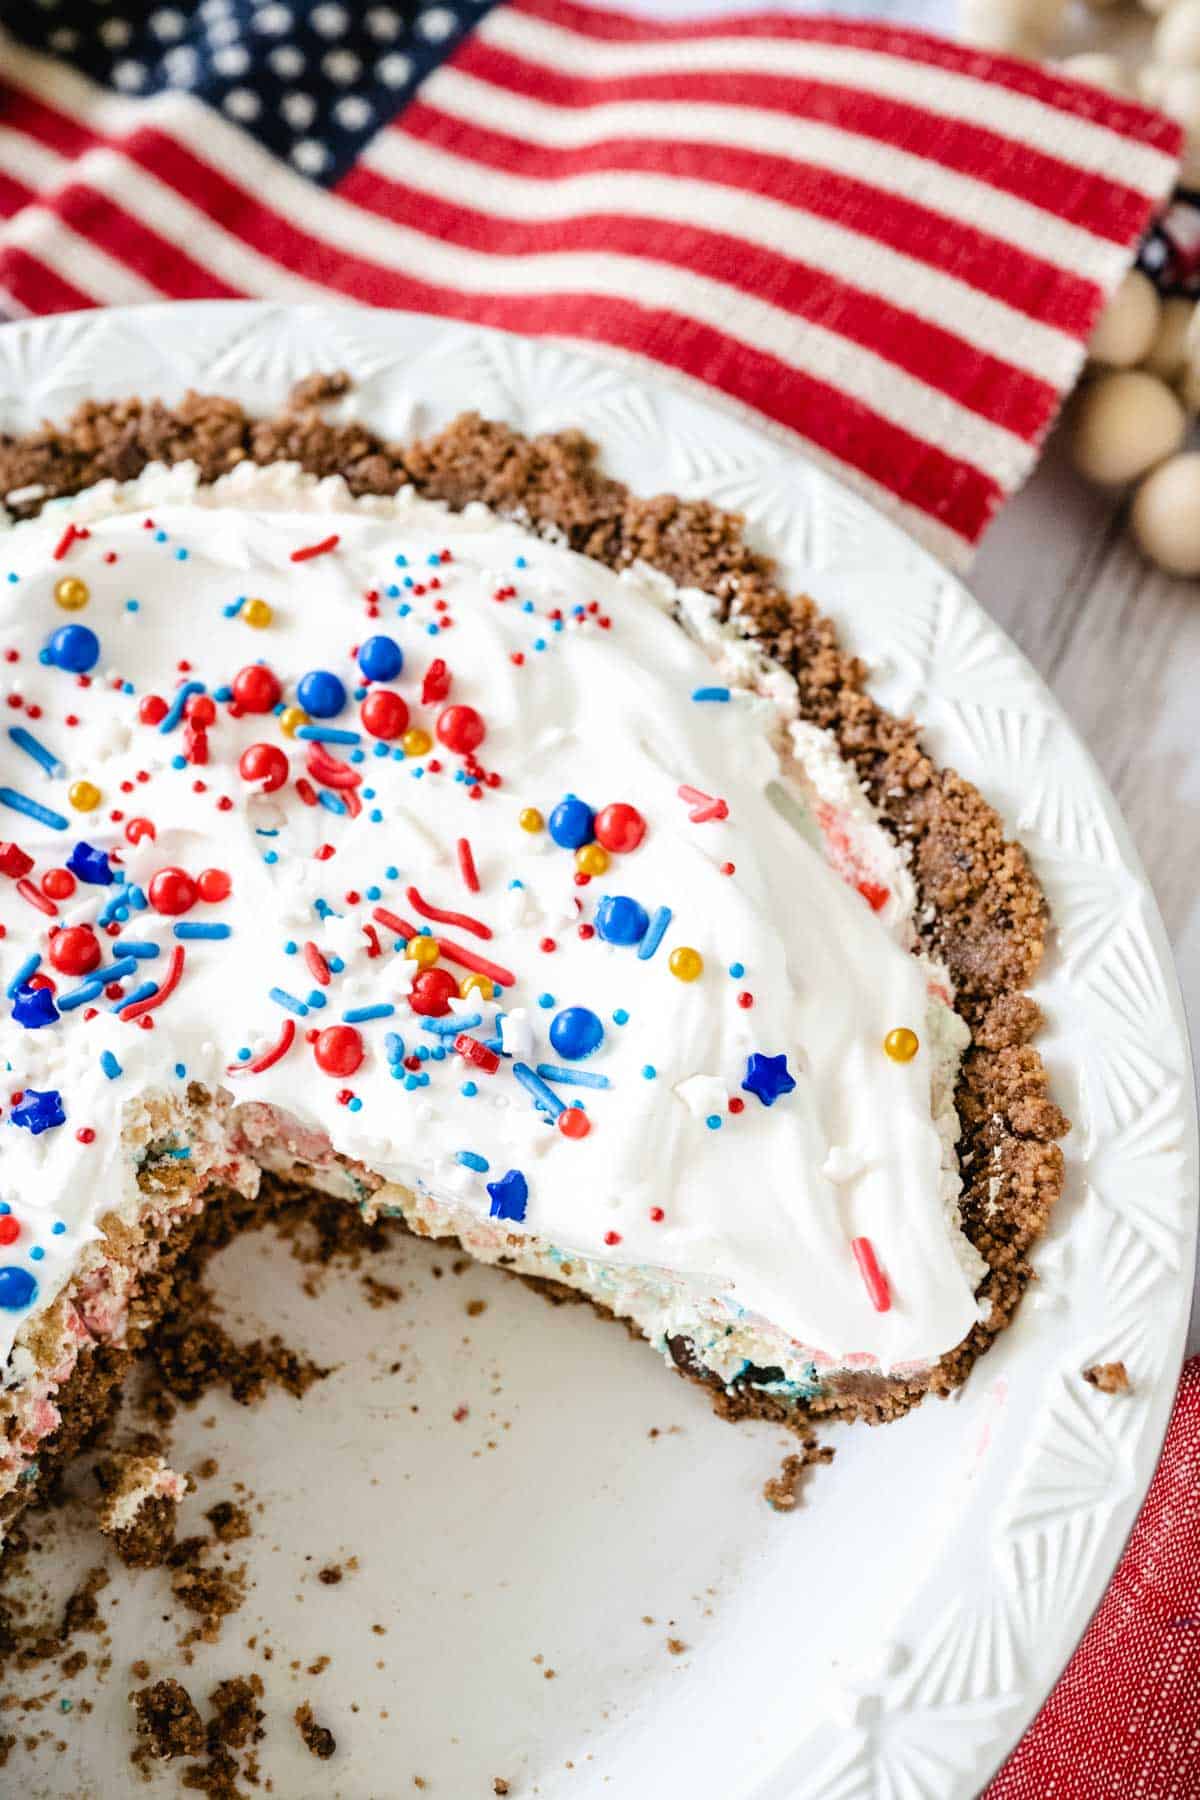 A whole chocolate chip cookie candy pie garnished with red, white, blue and gold sprinkles with slices removed in a white pie plate and an American flag in the background.